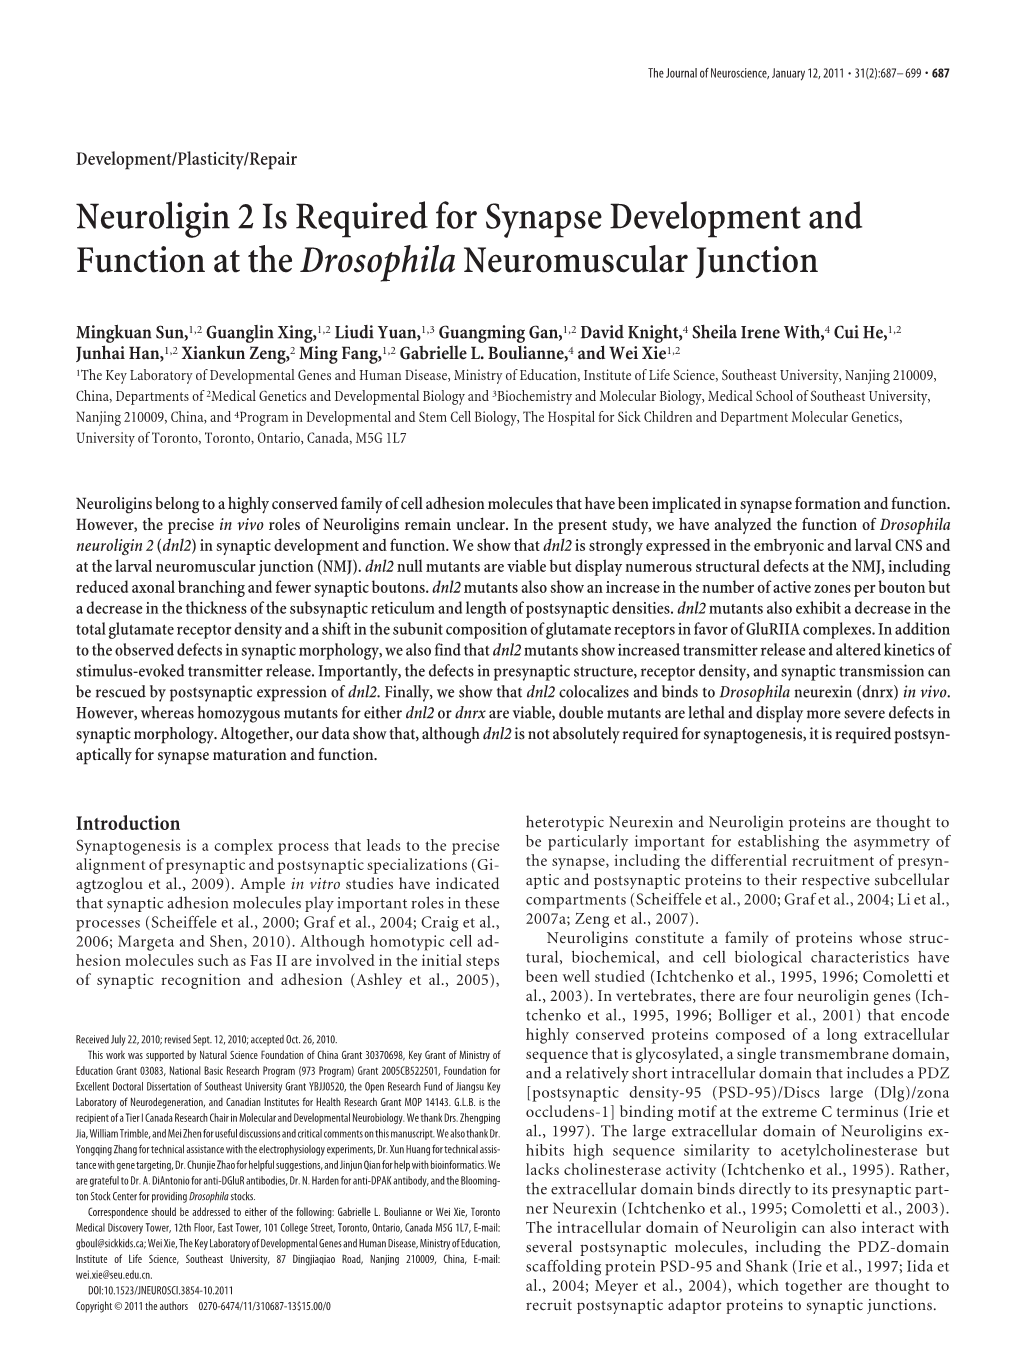 Neuroligin 2 Is Required for Synapse Development and Function at the Drosophila Neuromuscular Junction